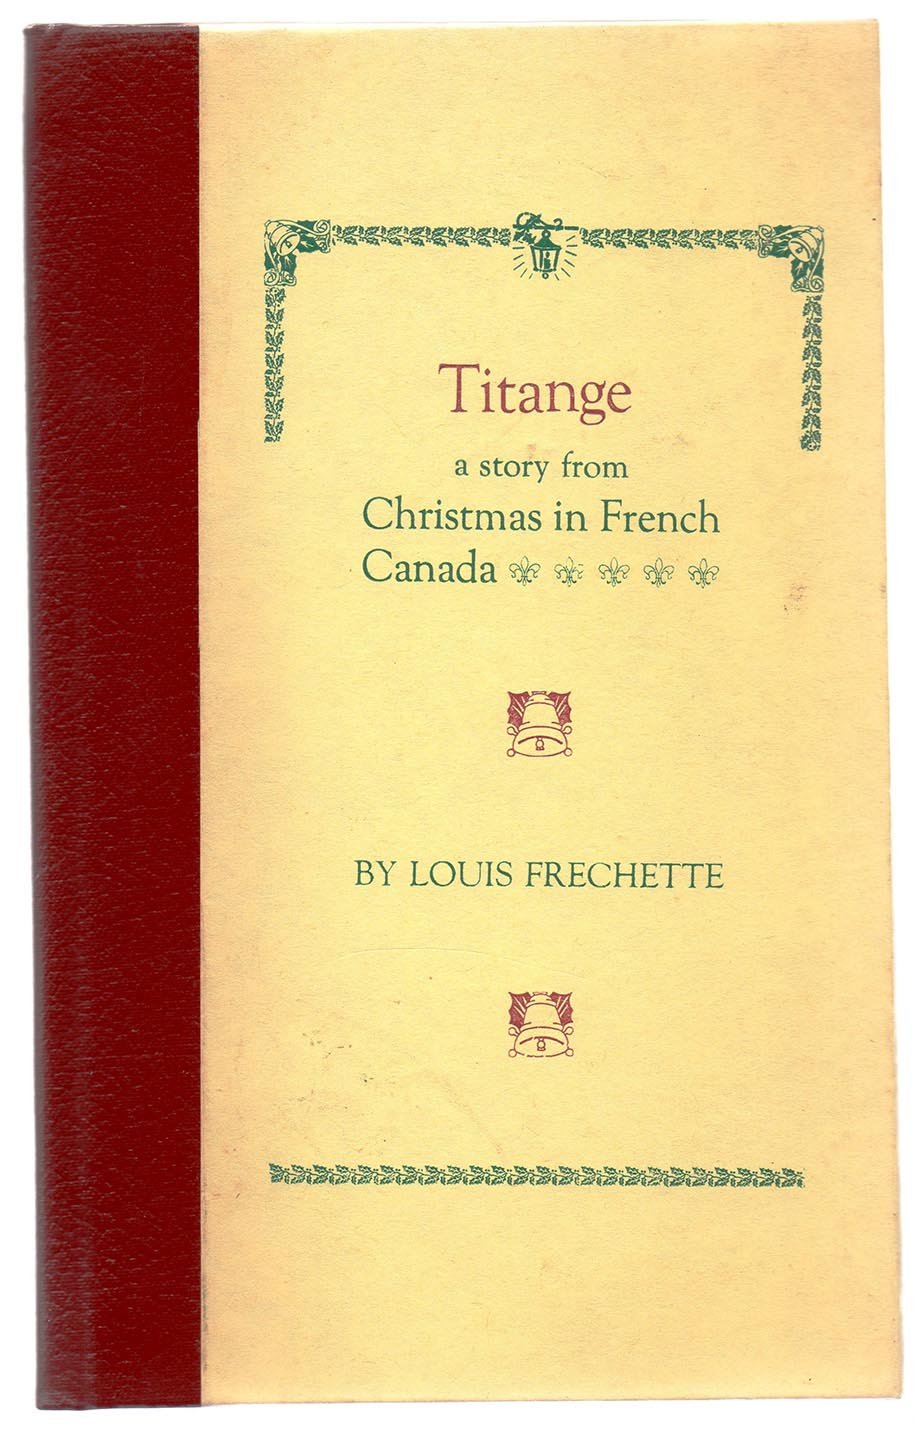 Titange: a story from Christmas in French Canada